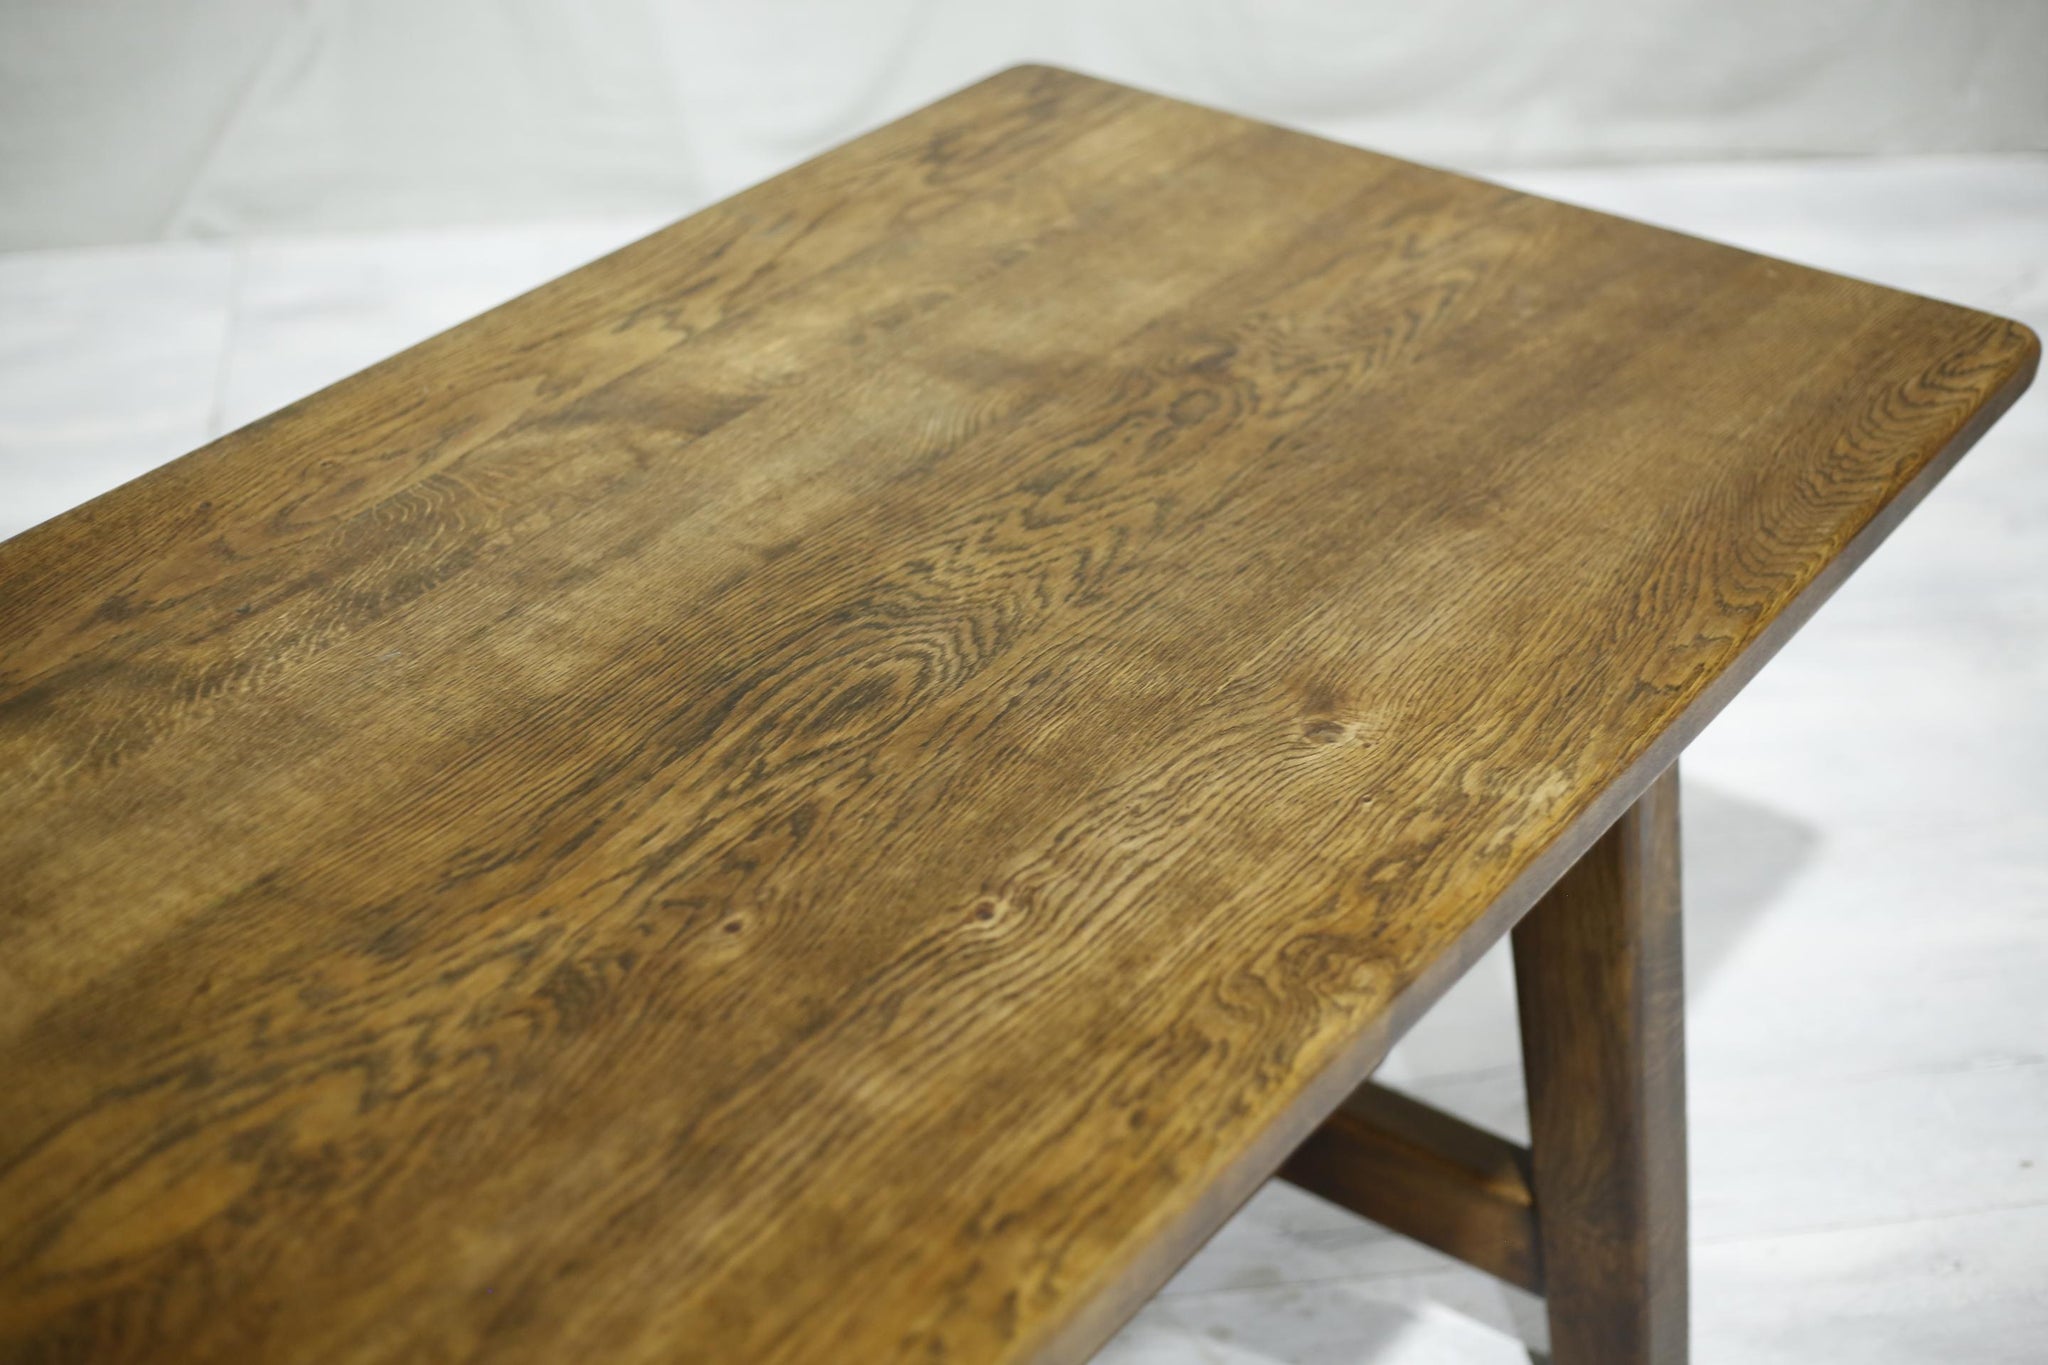 1940's French oak brutalist dining table